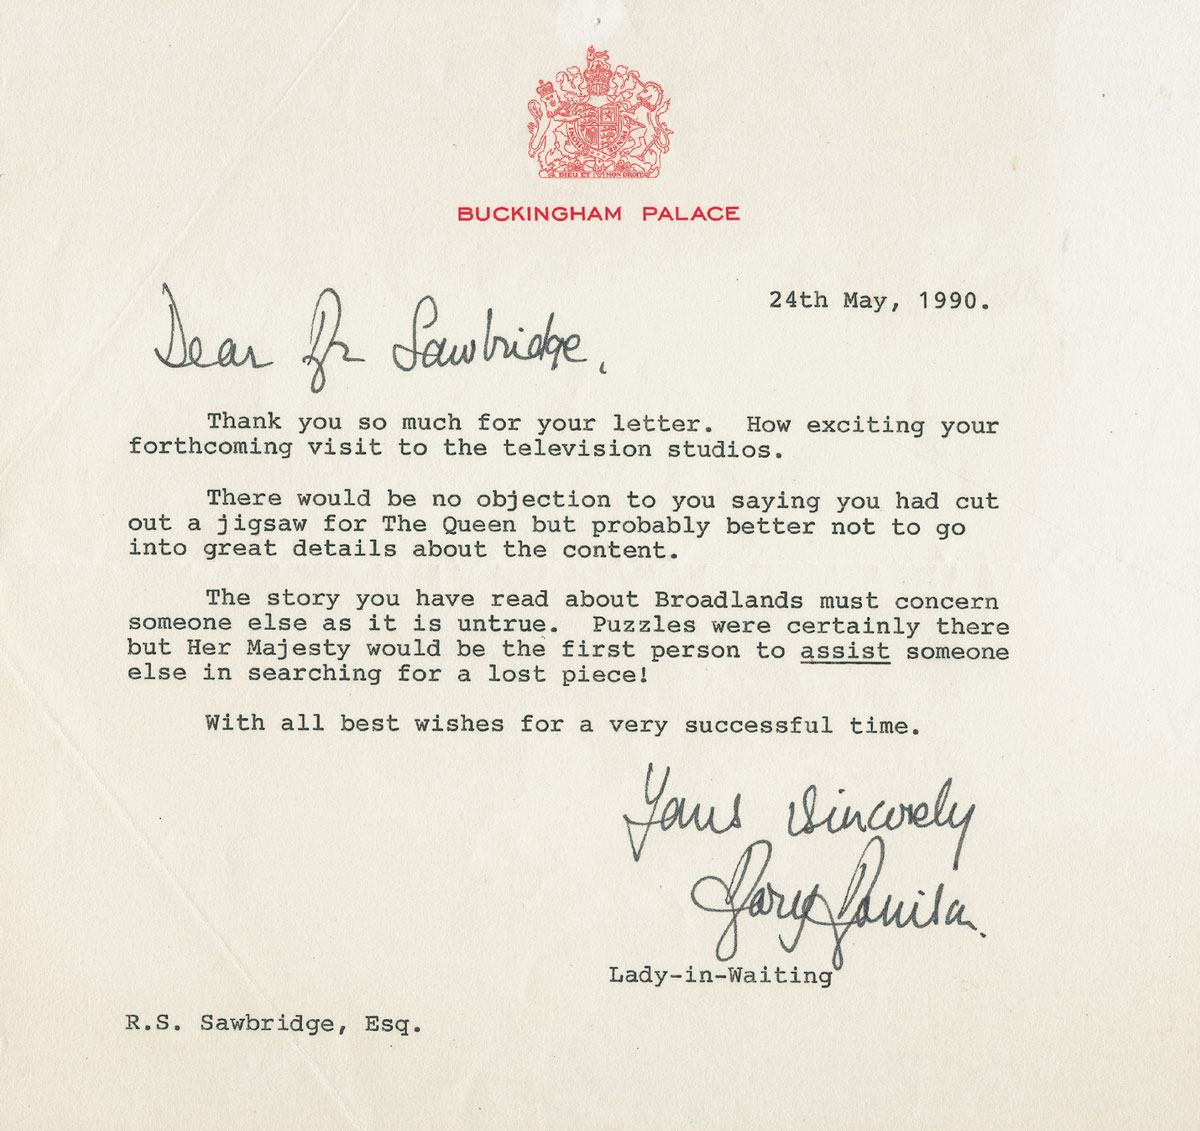 A letter from Queen Elizabeth's Lady-in-Waiting dated 24th of May 1990 to Dick Sawbridge. It reads, 